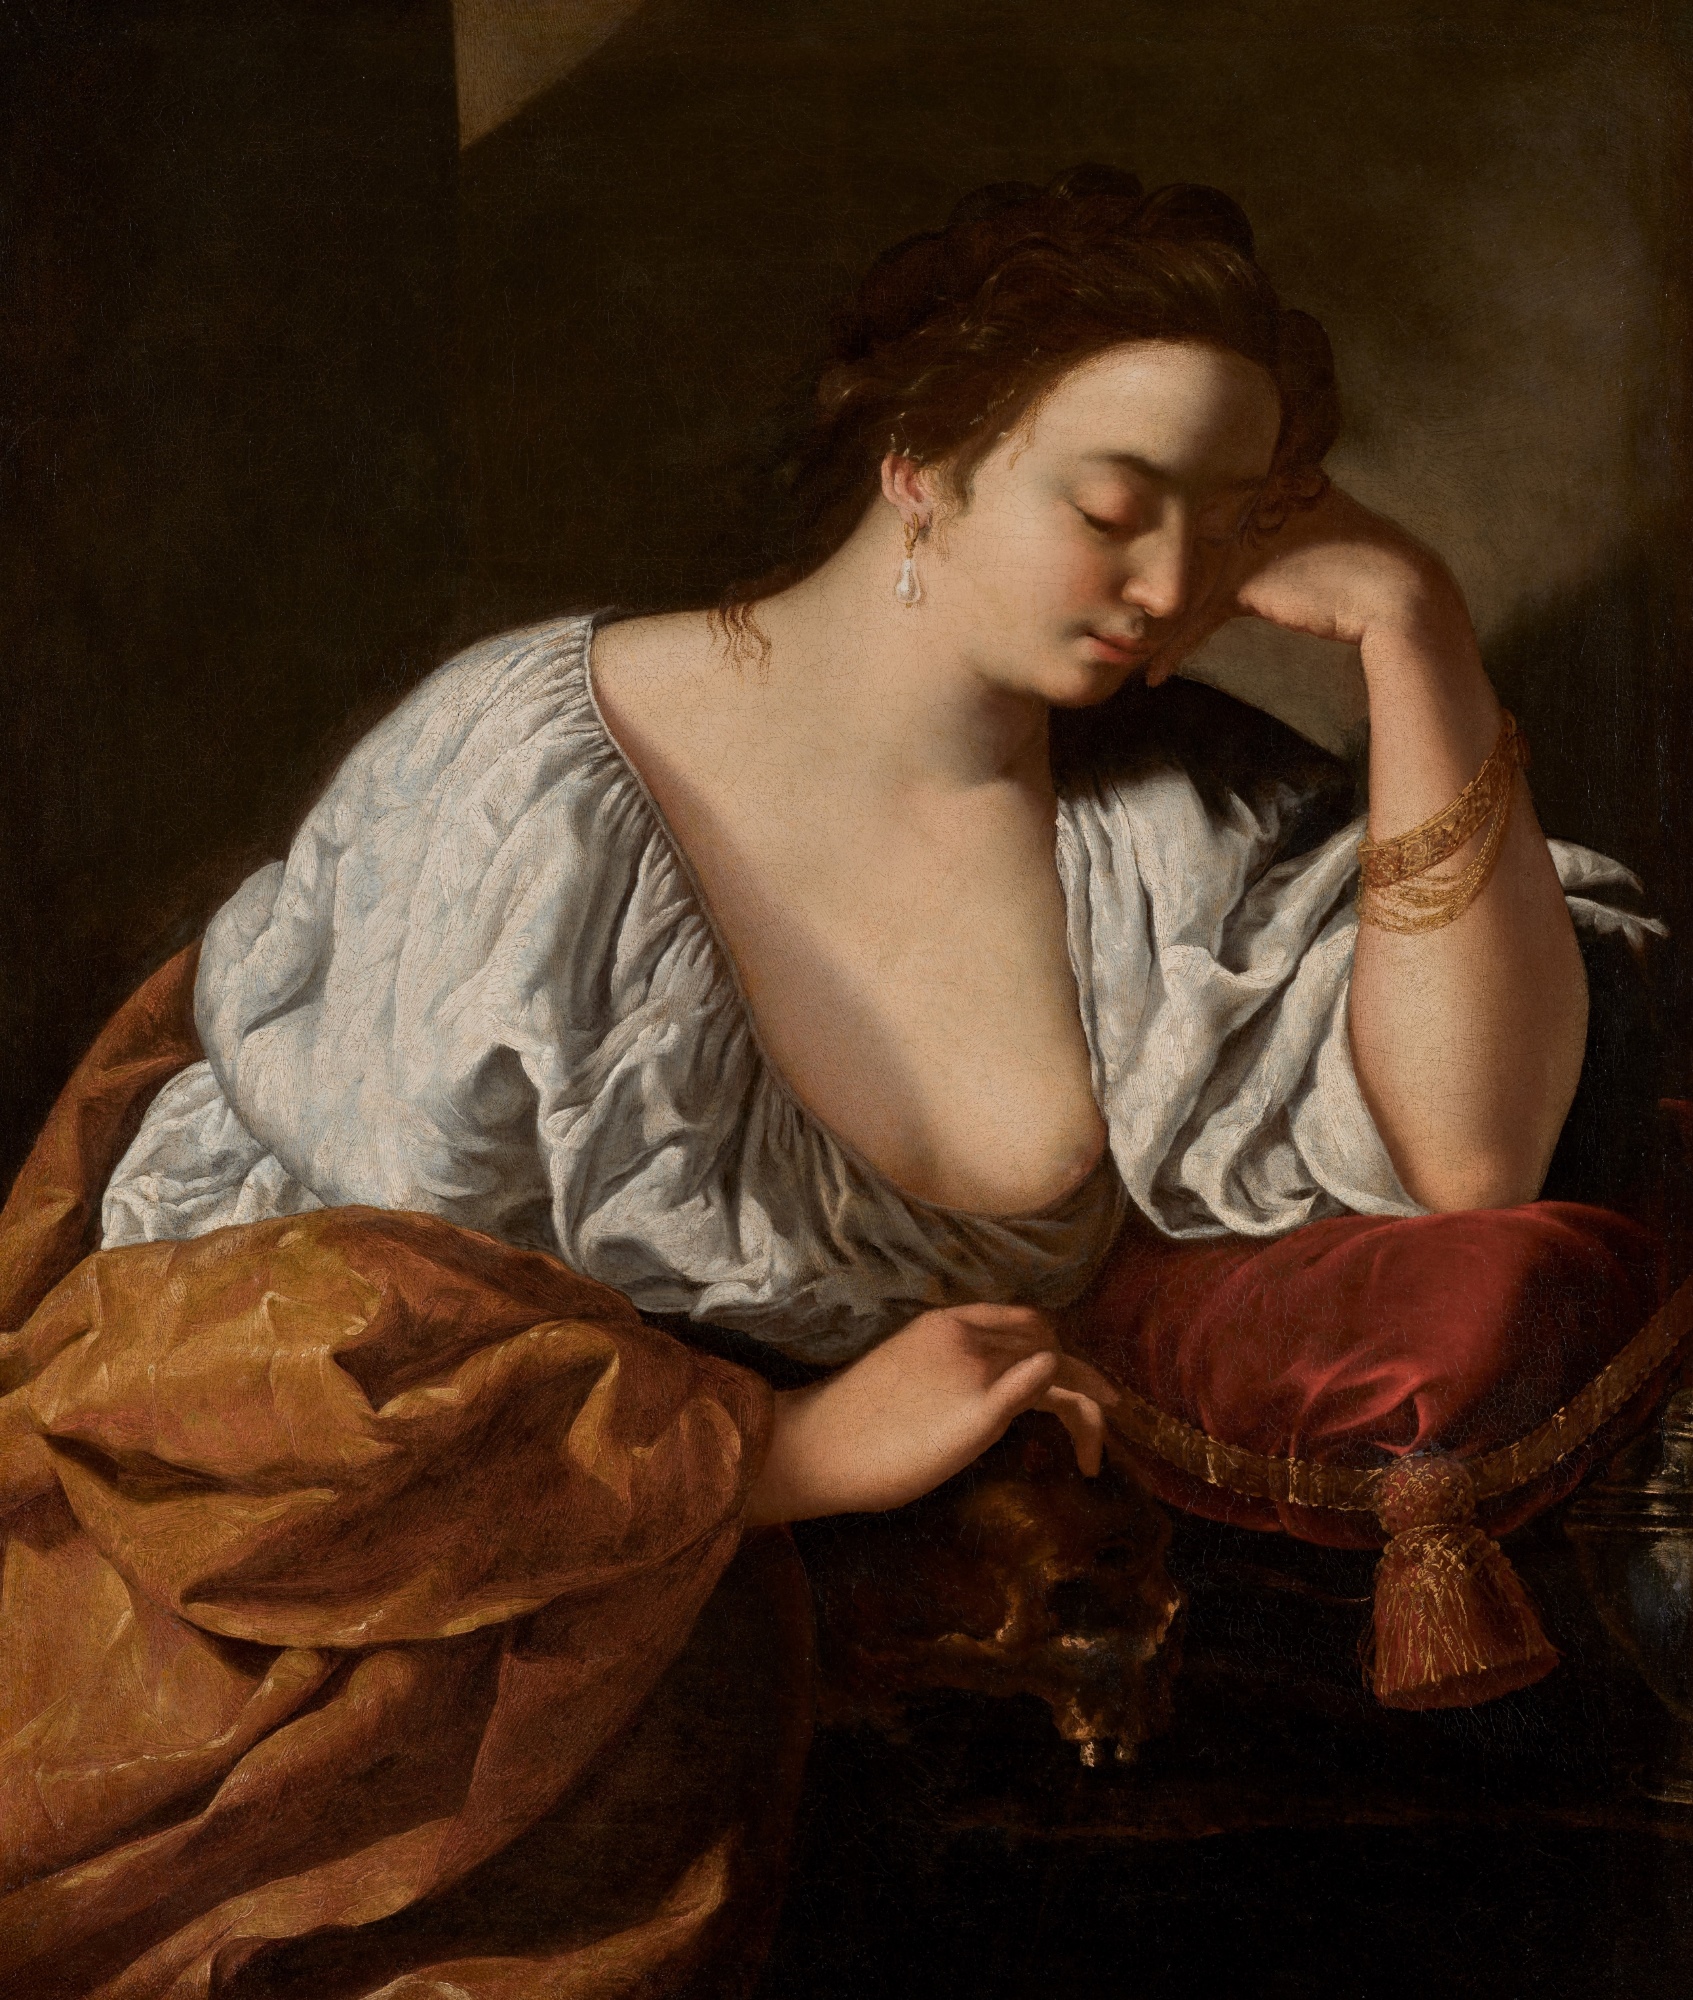 'Sensational' story behind stand-out Artemisia Gentileschi at TEFAF Maastricht